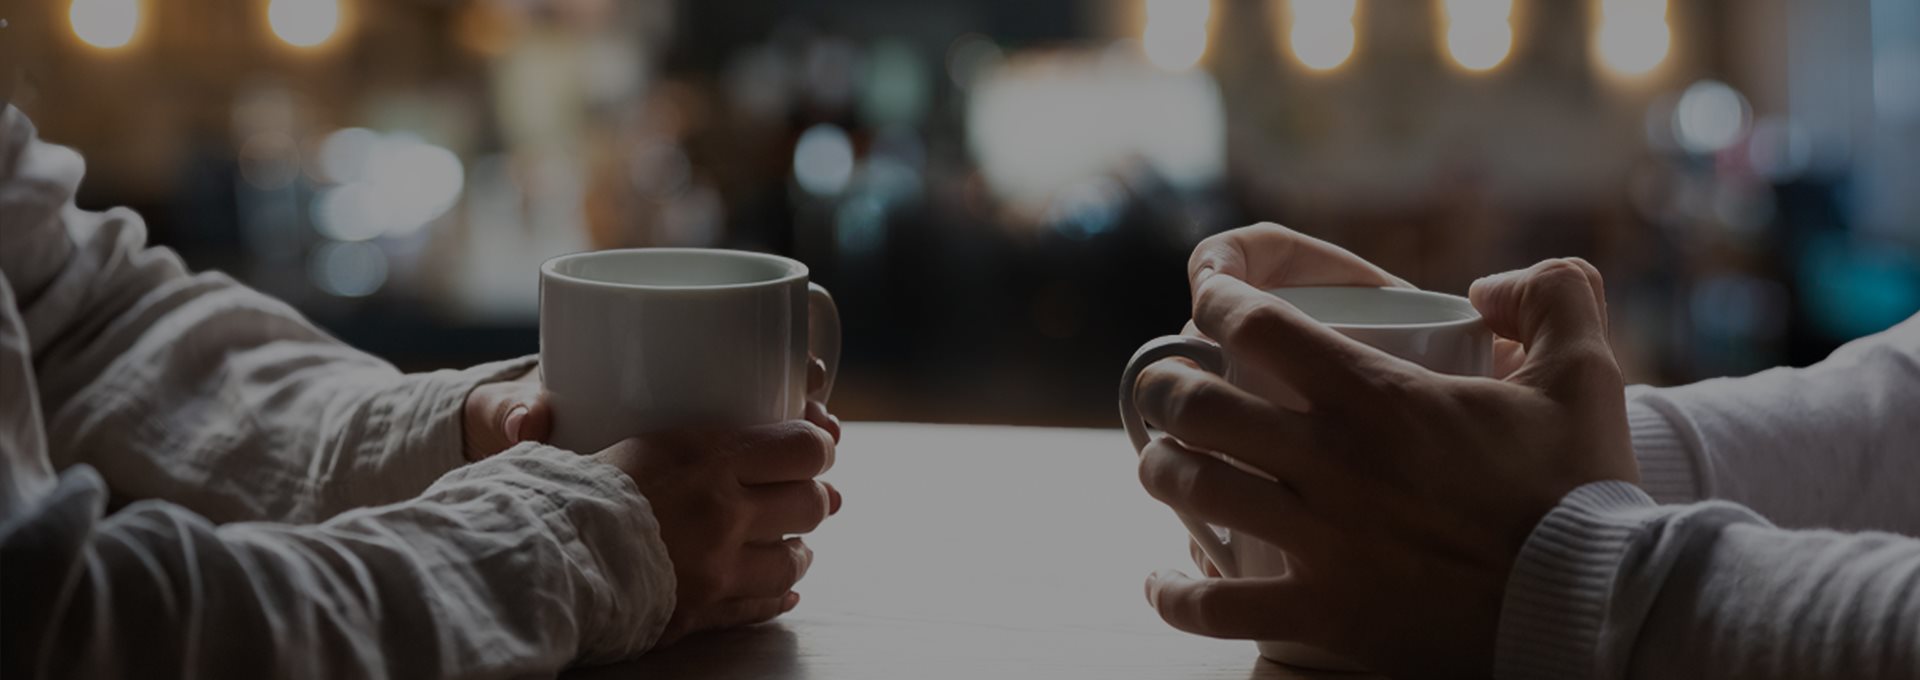 Two people sitting across a table holding coffee cups